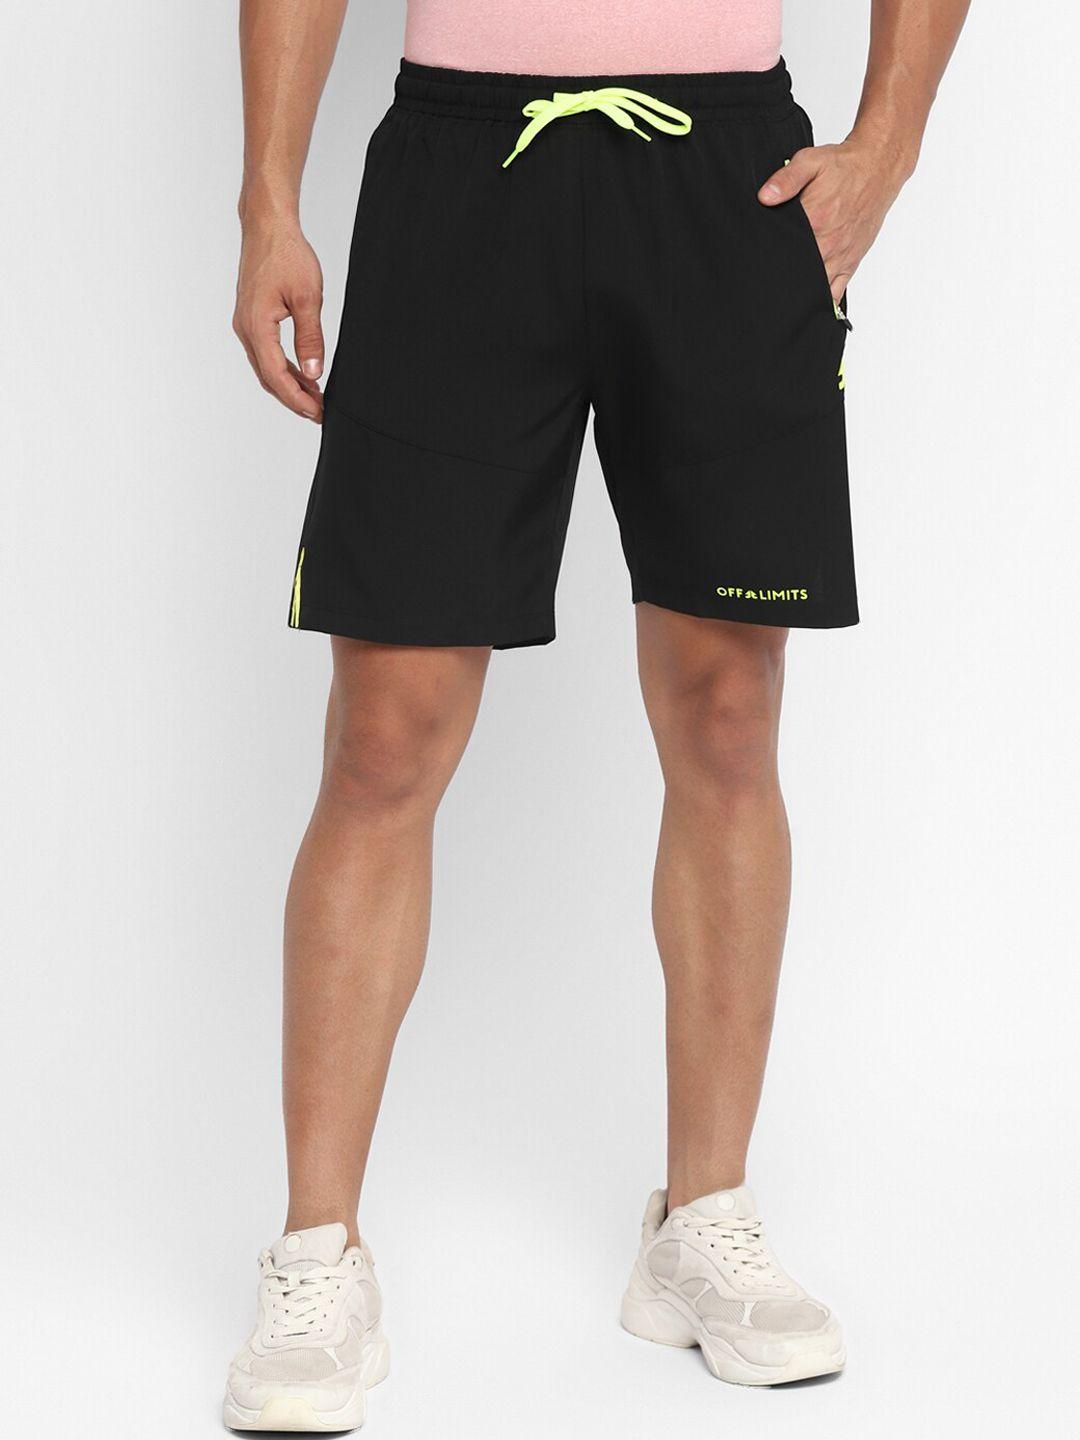 off-limits-men-colourblocked-training-or-gym-cotton-sports-shorts